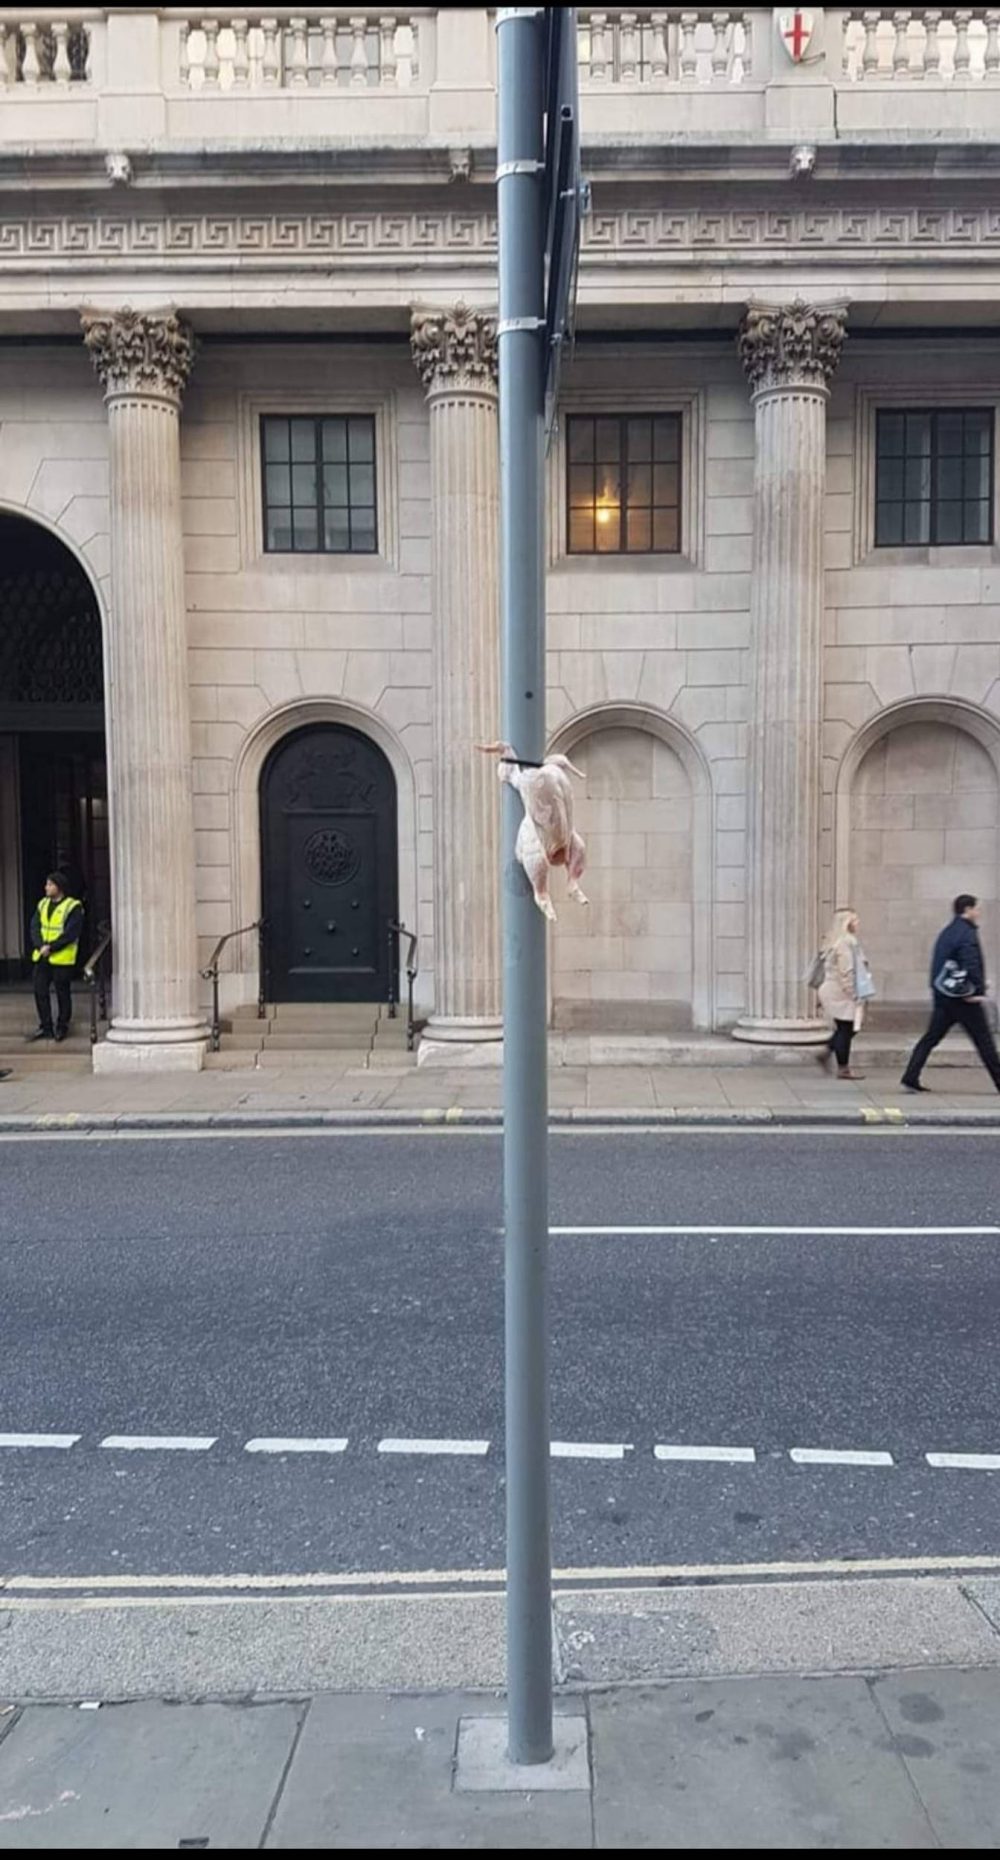 Chicken cable tied to a sign post | London News